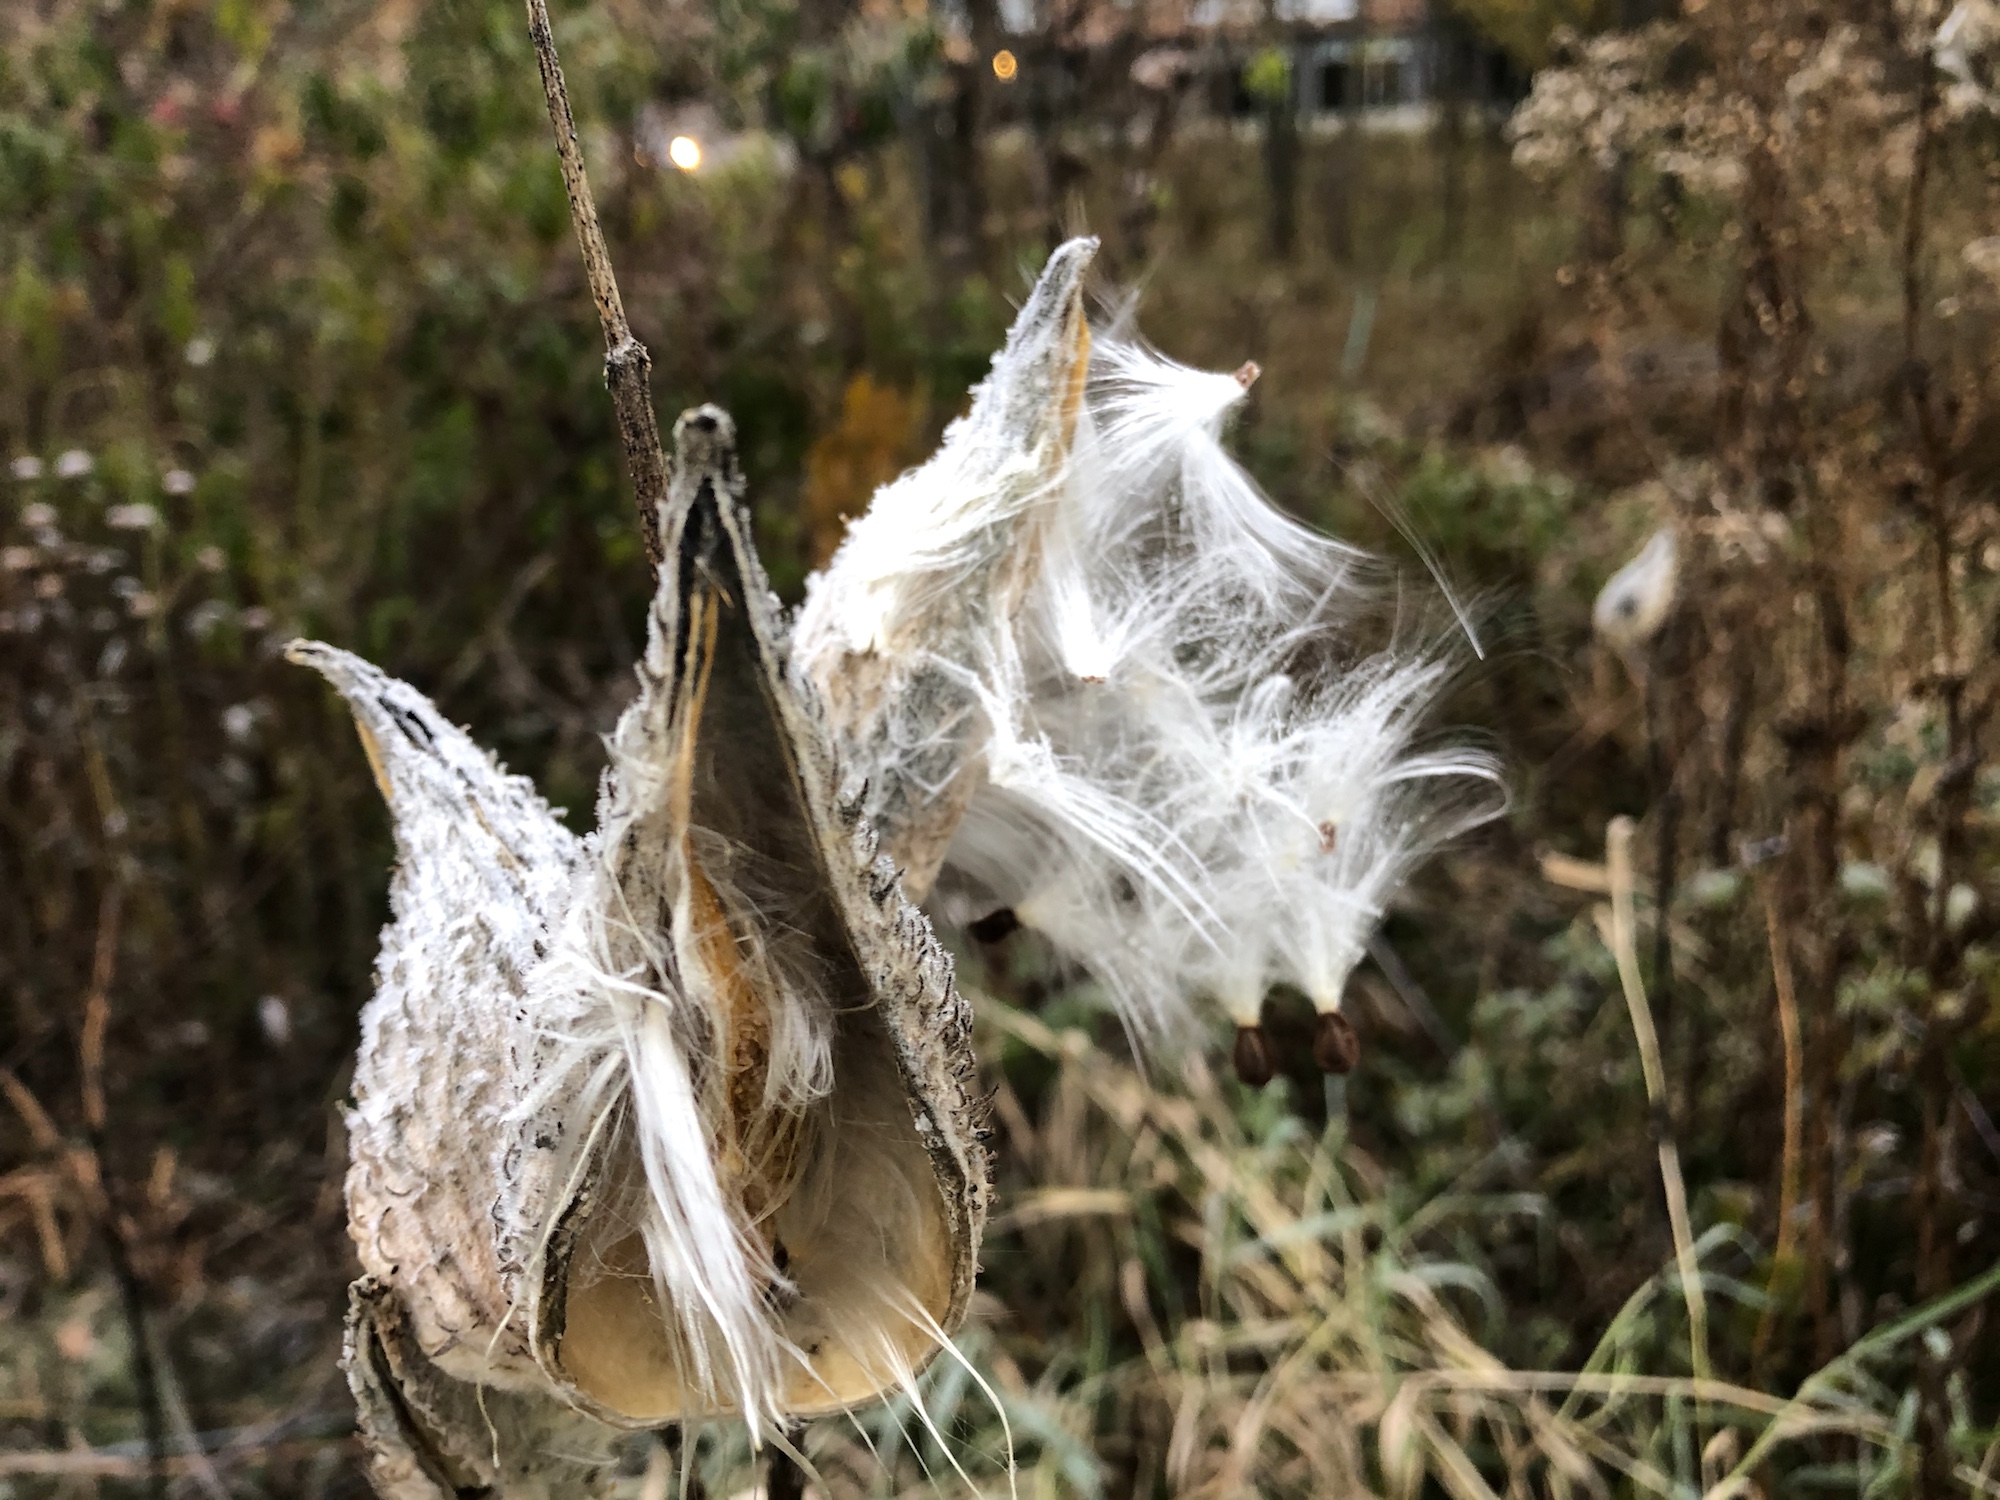 Common Milkweed on shore of Marion Dunn Pond on October 26, 2019.